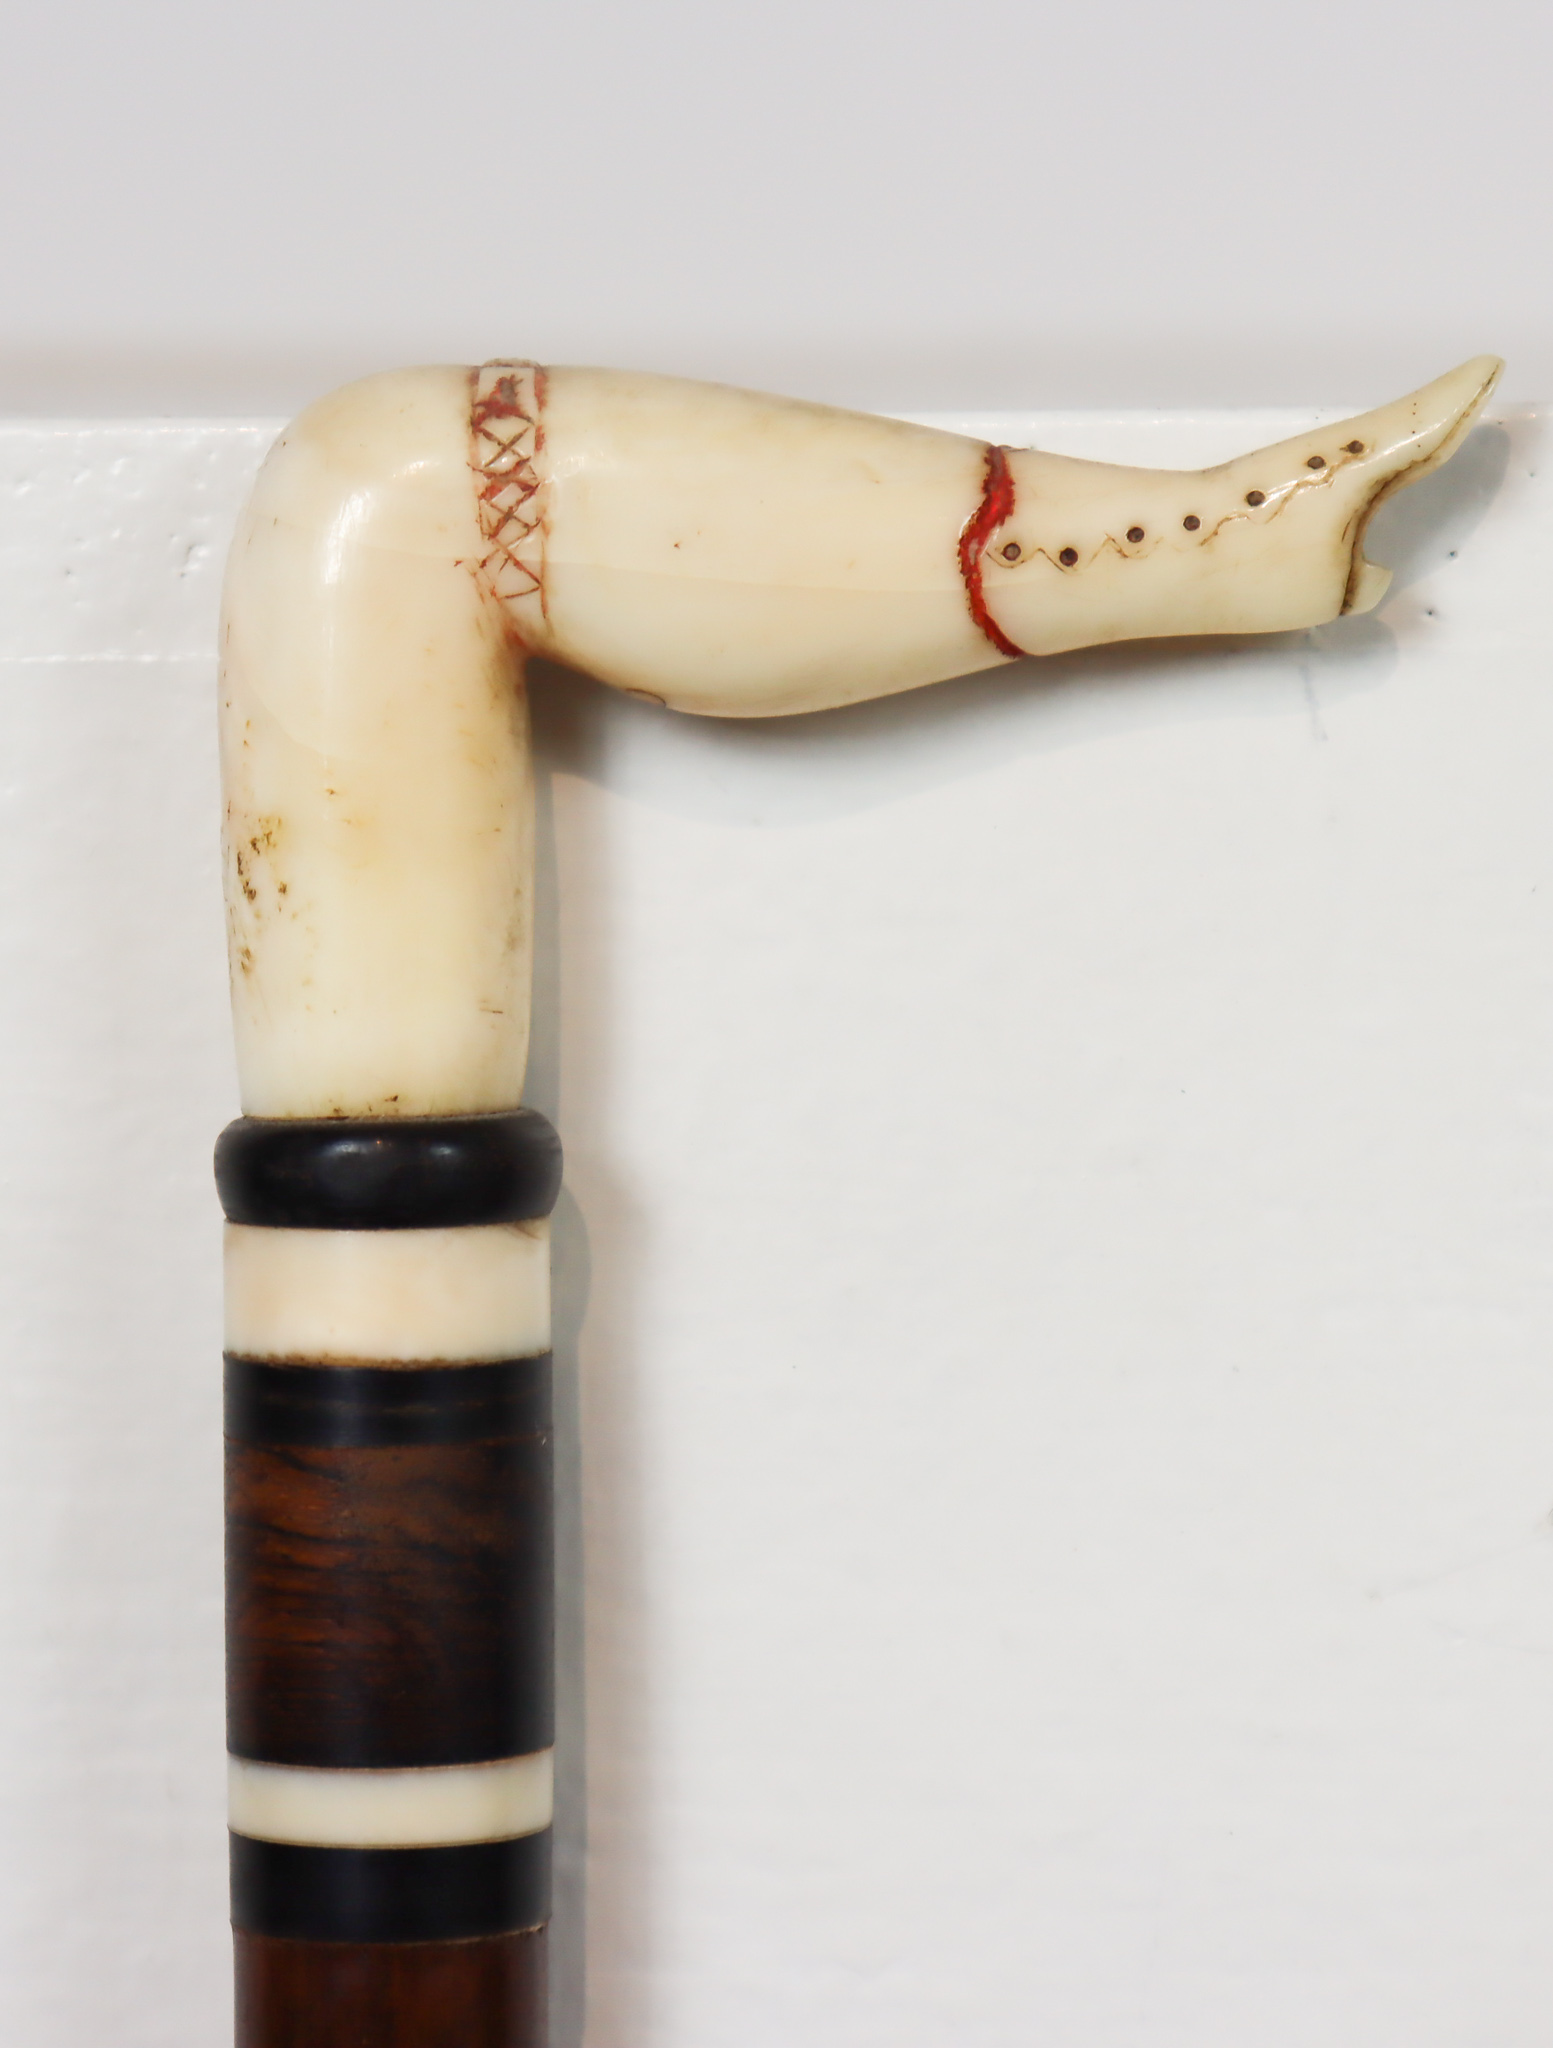 19th C. Whale Bone Boot Handle Cane - Image 4 of 7